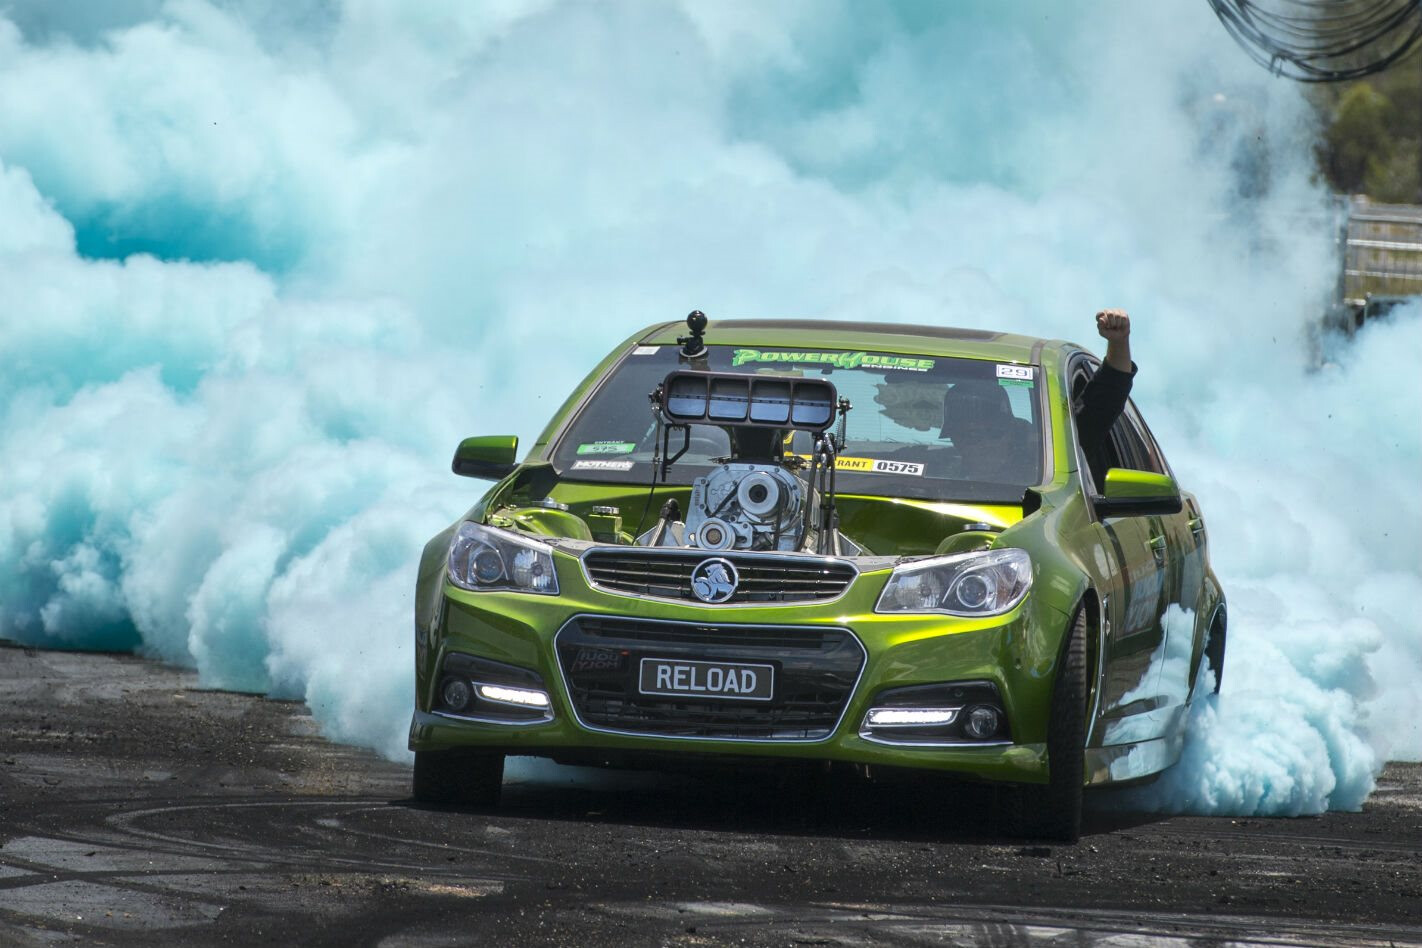 VIDEO: RELOAD VF COMMODORE BURNOUT FIRE AT SUMMERNATS 29